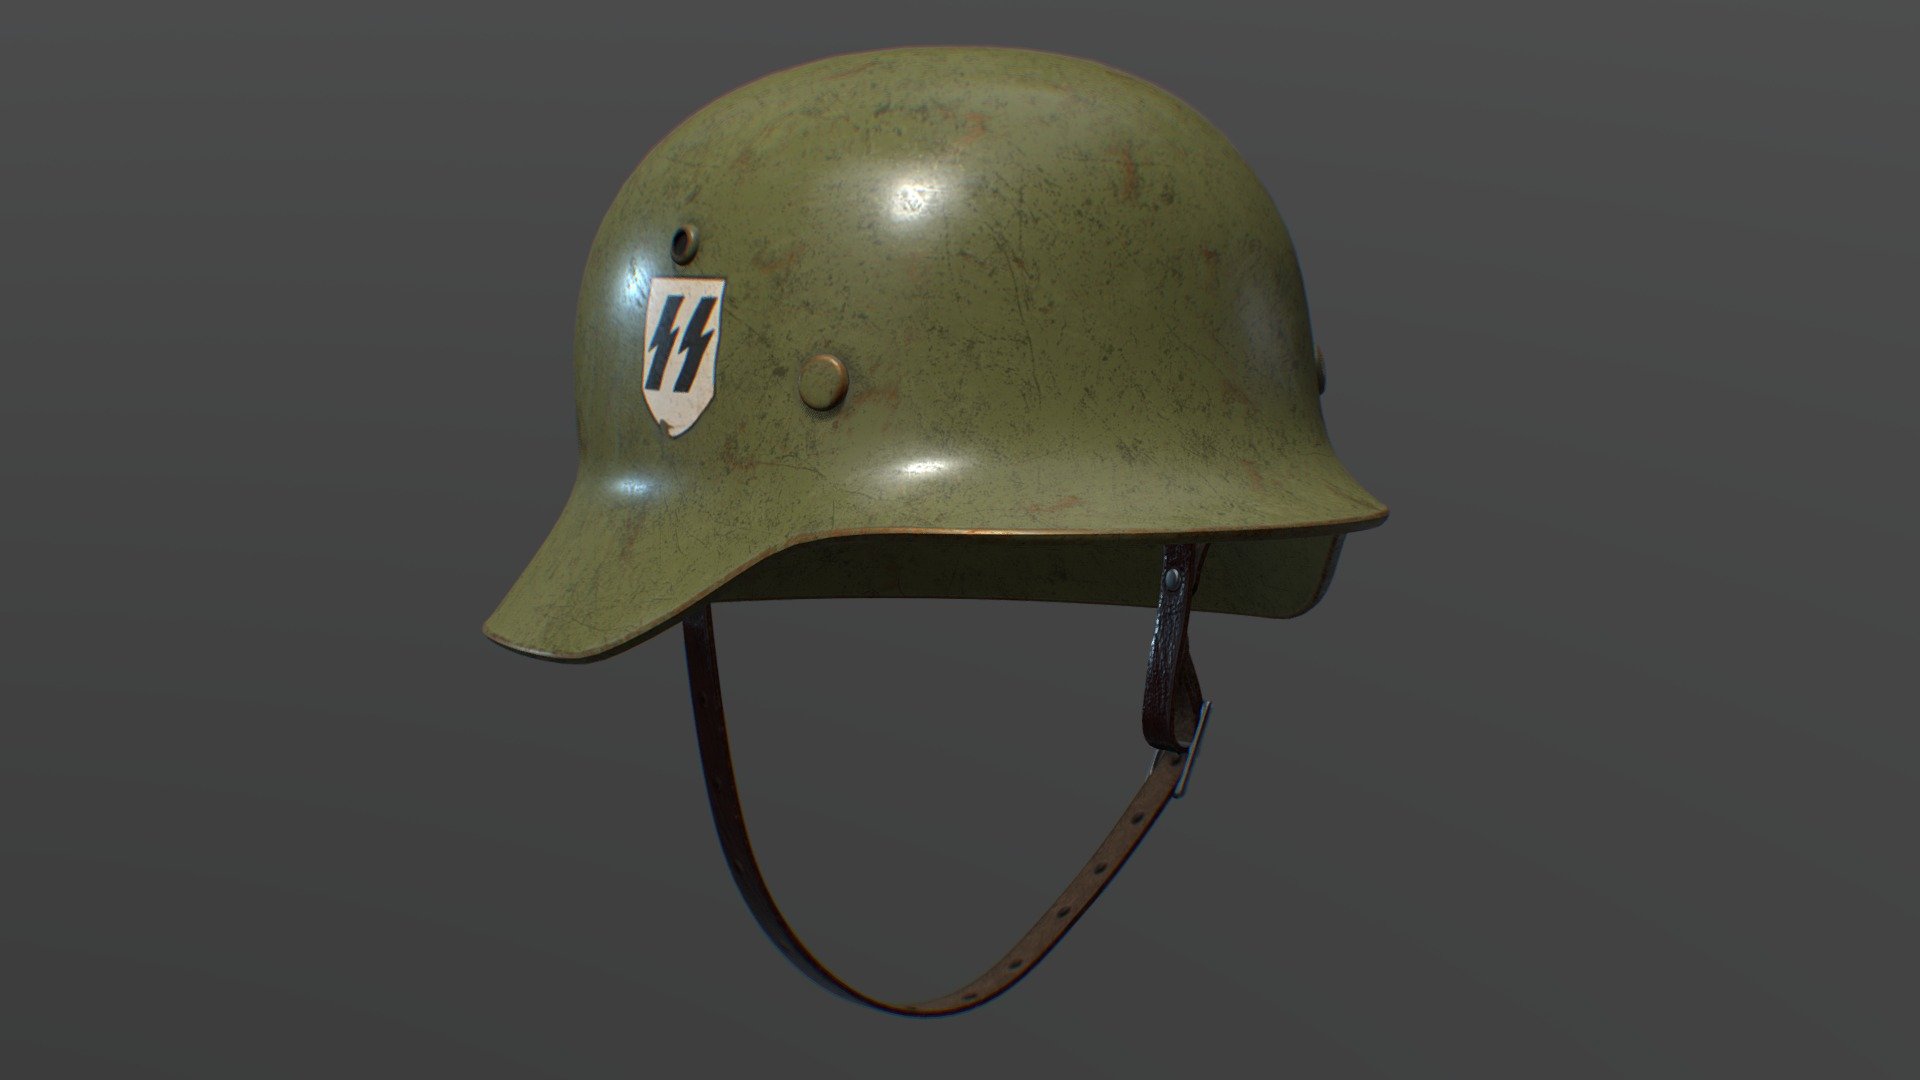 Nazi Helmet is a high quality, photo real model that will enhance detail and realism to any of your rendering projects. The model has a fully textured, detailed design that allows for close-up renders, and was originally modeled in cinema 4d and rendered with advance render and marmoset. || USAGE || This model is suitable for use in (broadcast, high-res film closeups, advertising, design visualization, forensic presentation, etc). || SPECS || The model contains 1 object . The model contains 4454 polygons without subdivision. || TEXTURES || PBR Textures :Base color / metalness / Normal / Roughness / OA . Dim : 2048 x 2048 || FORMAT || CINEMA4D R17 . 3ds Max 2016 . FBX Low Poly. || GENERAL || Model is built to real-world scale . Units used: Centimeters. Please rate it if you like it.Thank you 3d model